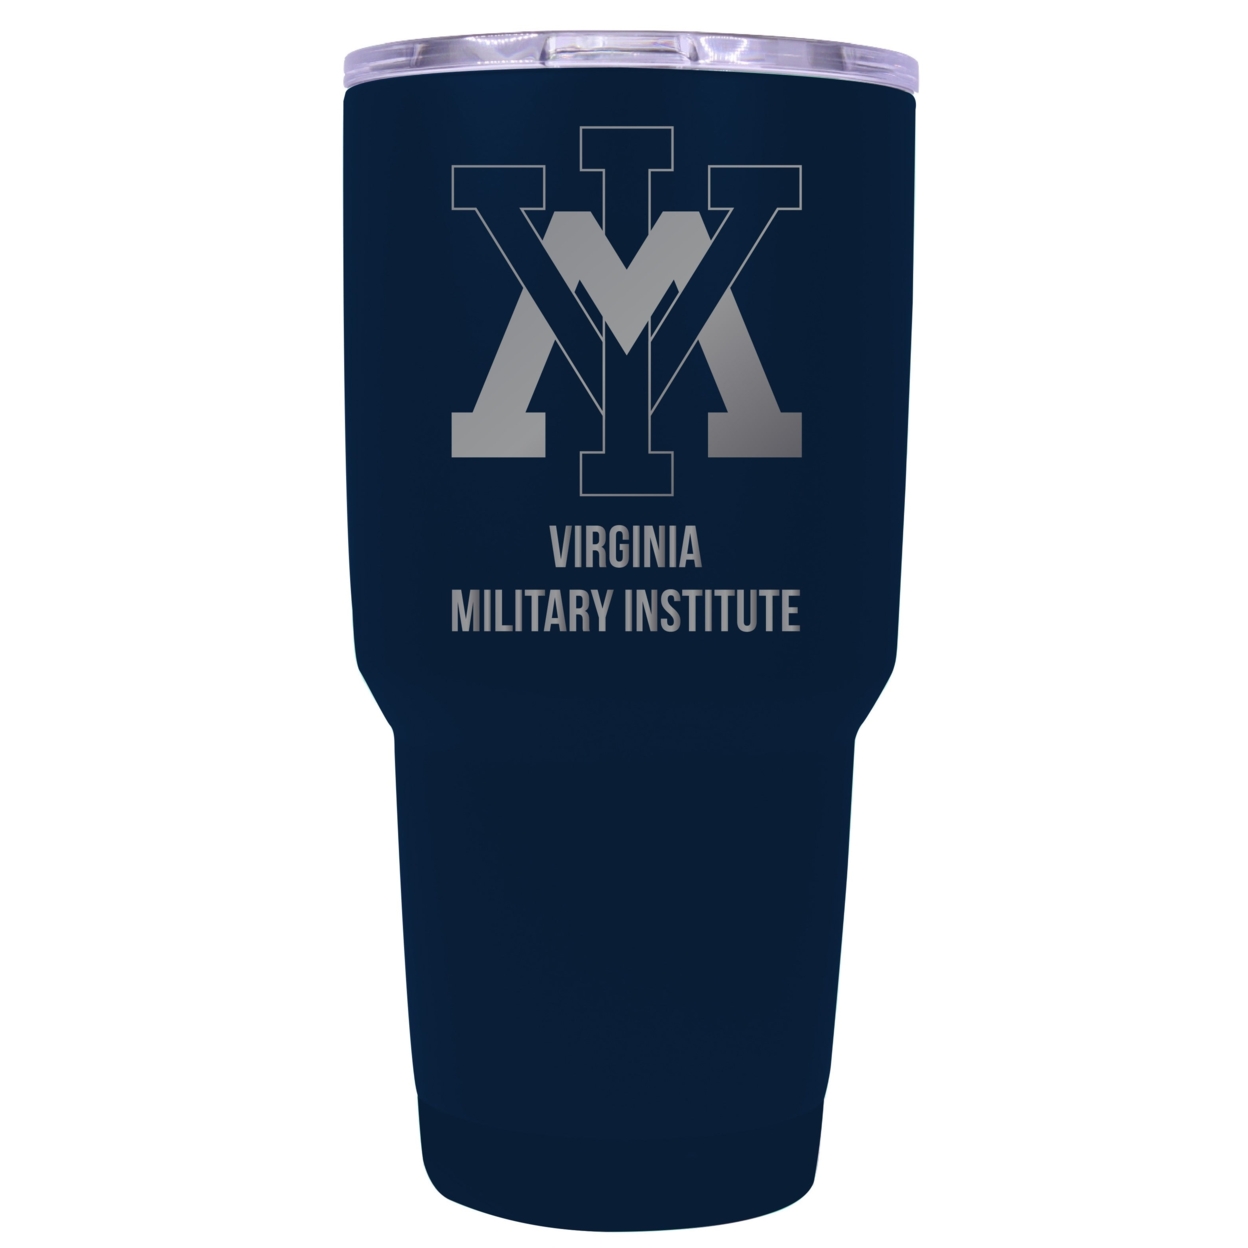 VMI Keydets 24 Oz Laser Engraved Stainless Steel Insulated Tumbler - Choose Your Color. - Navy